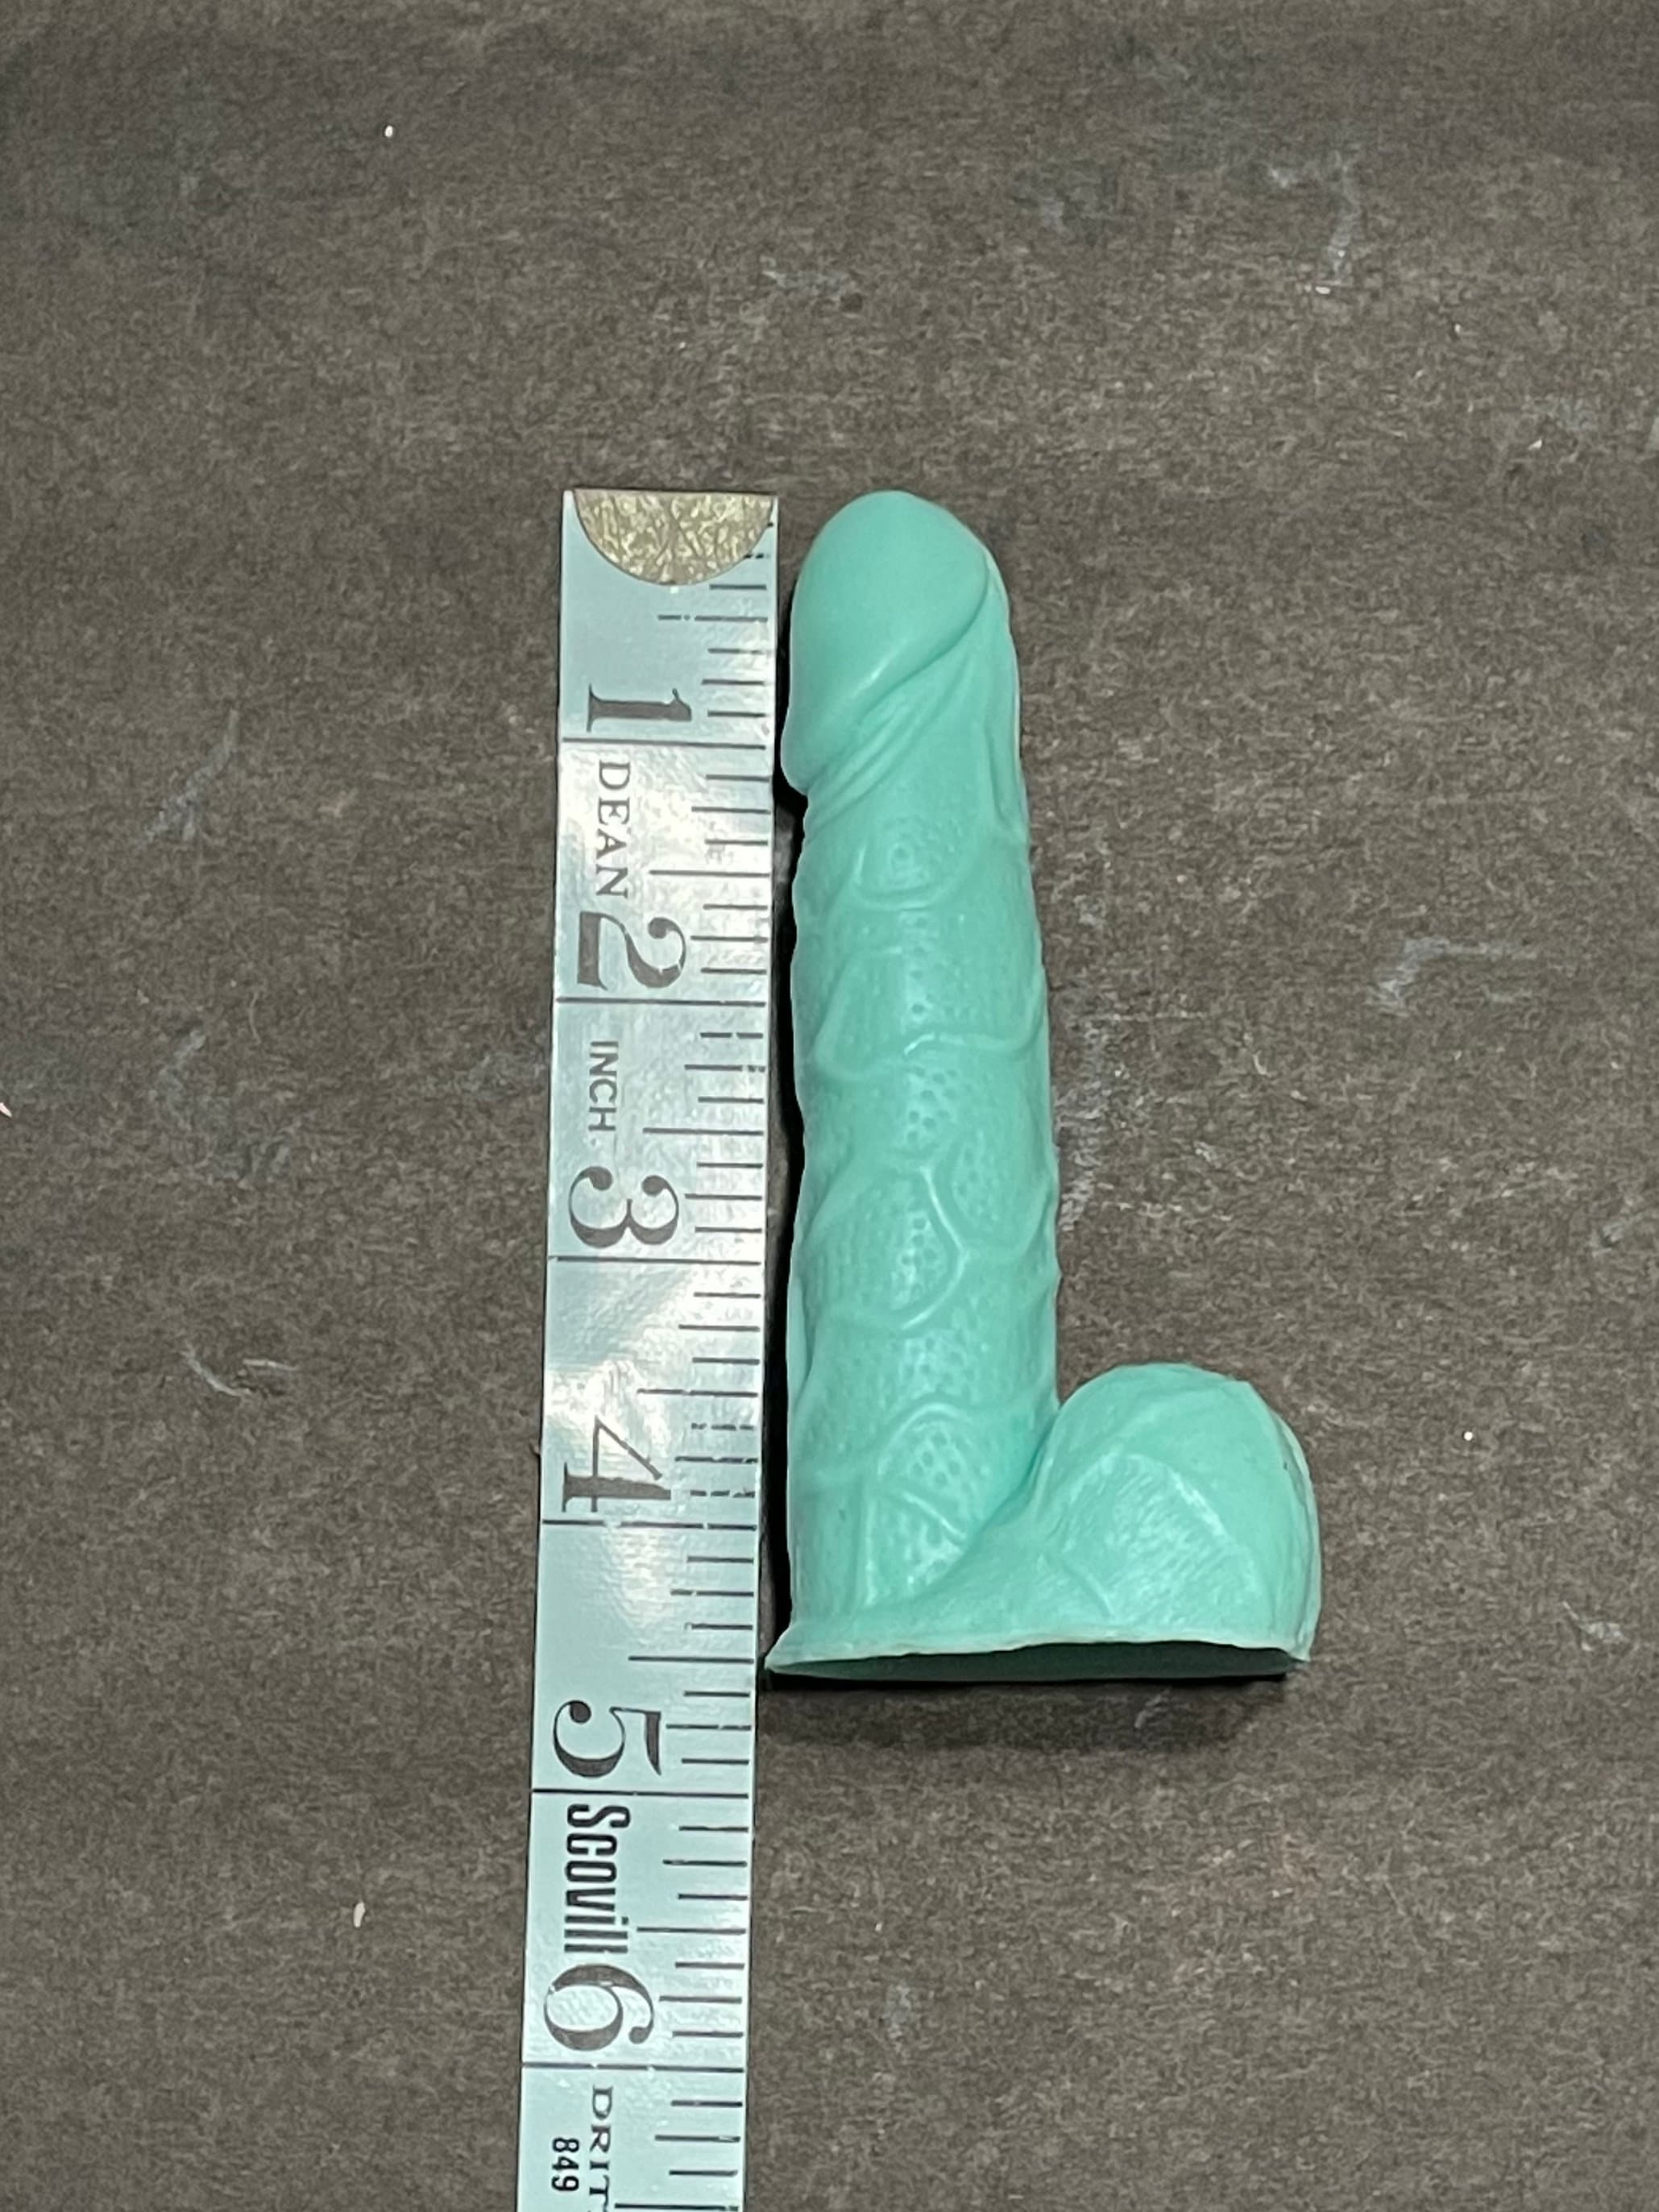 i have a 5 inch penis